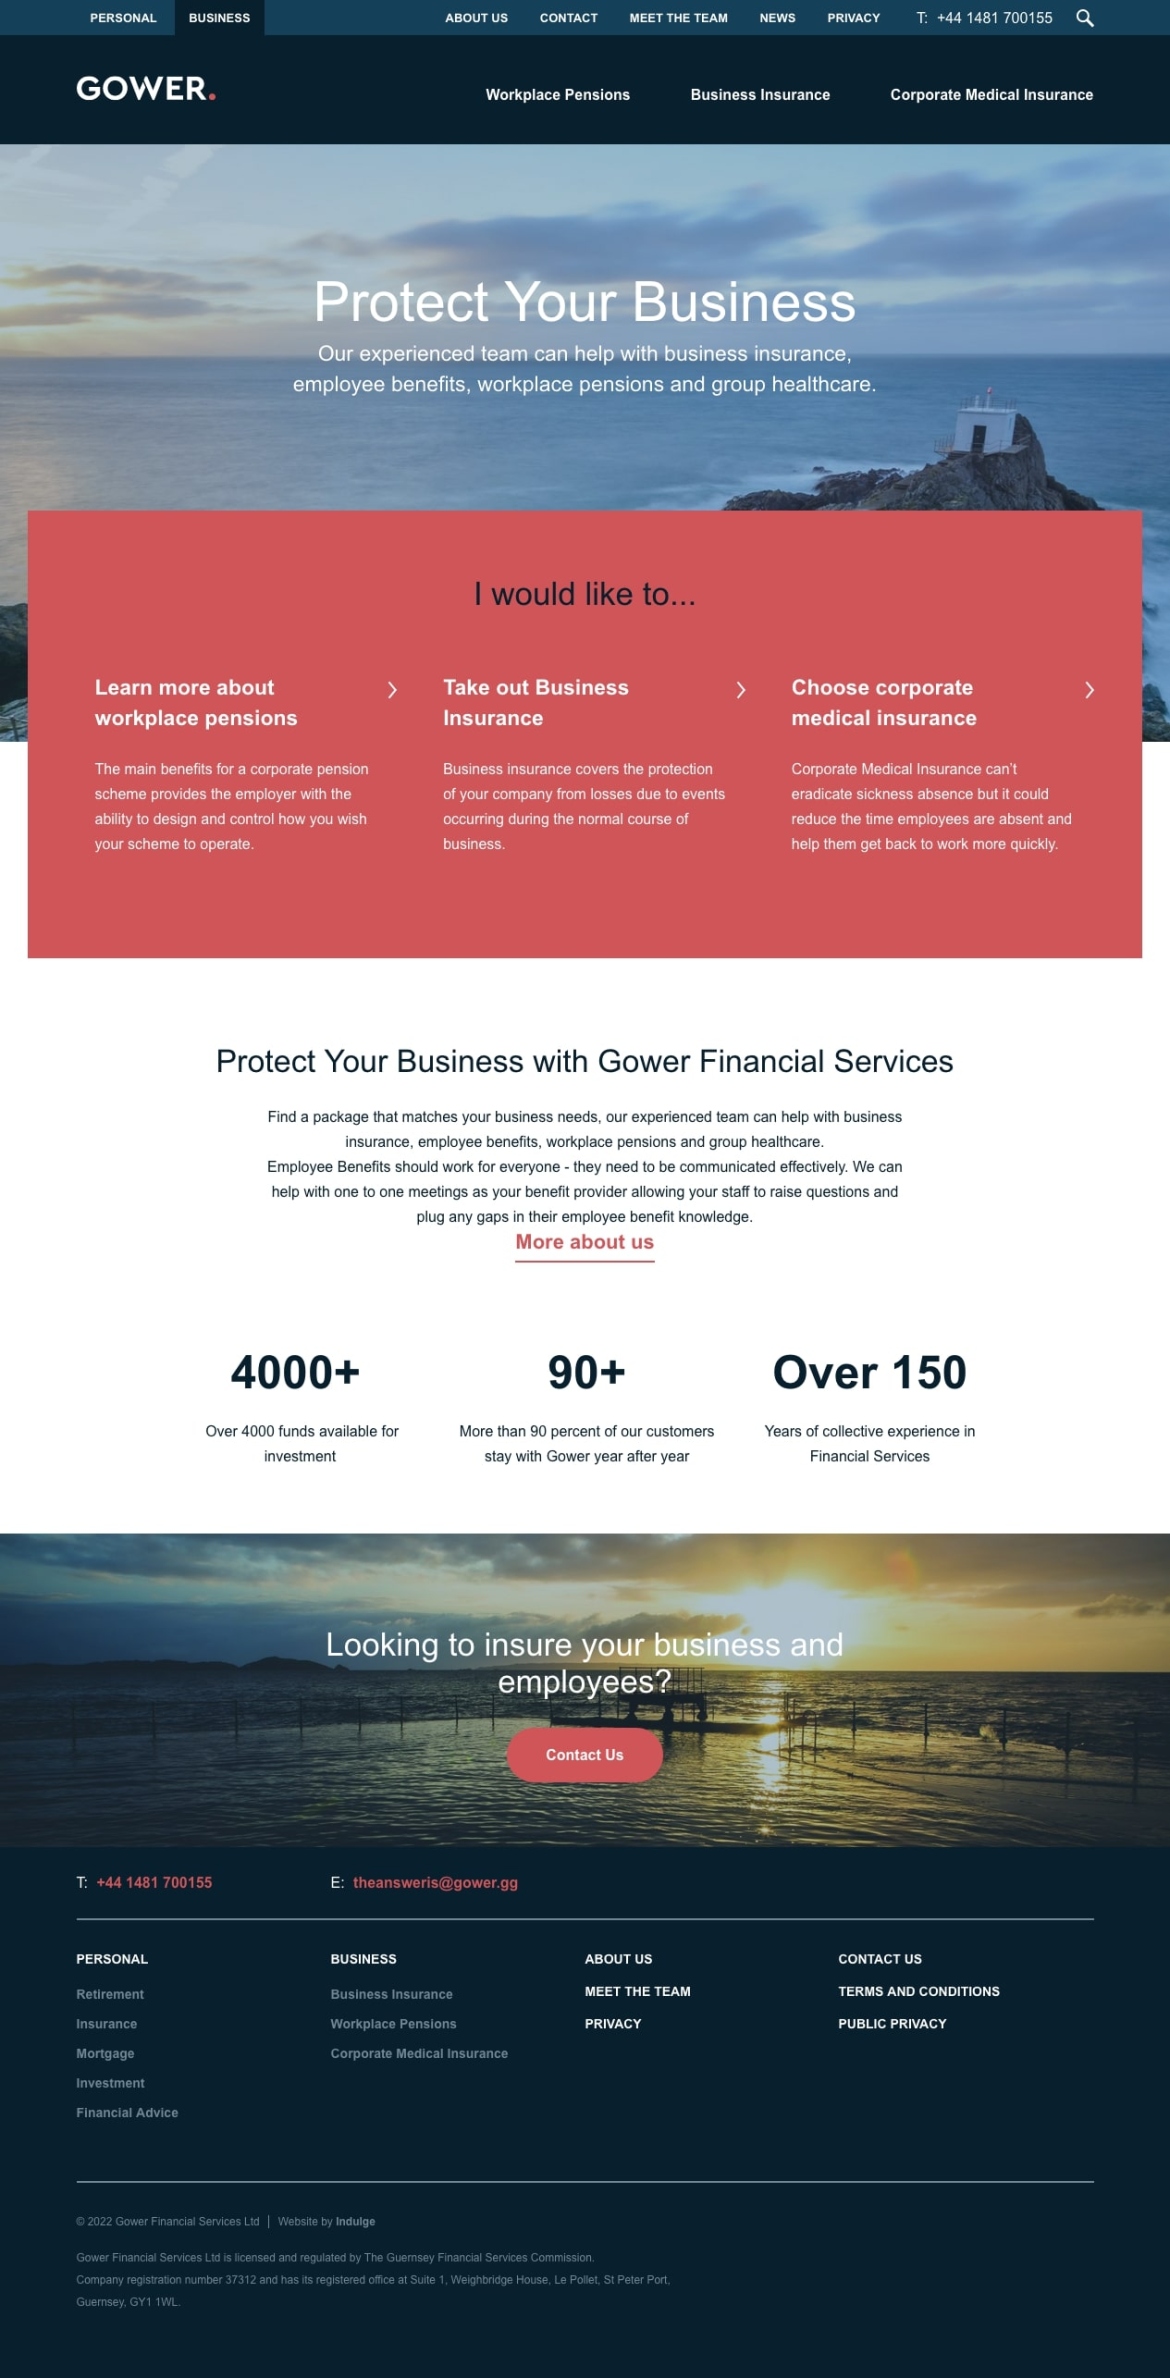 Gower Financial Services website screenshot of business section